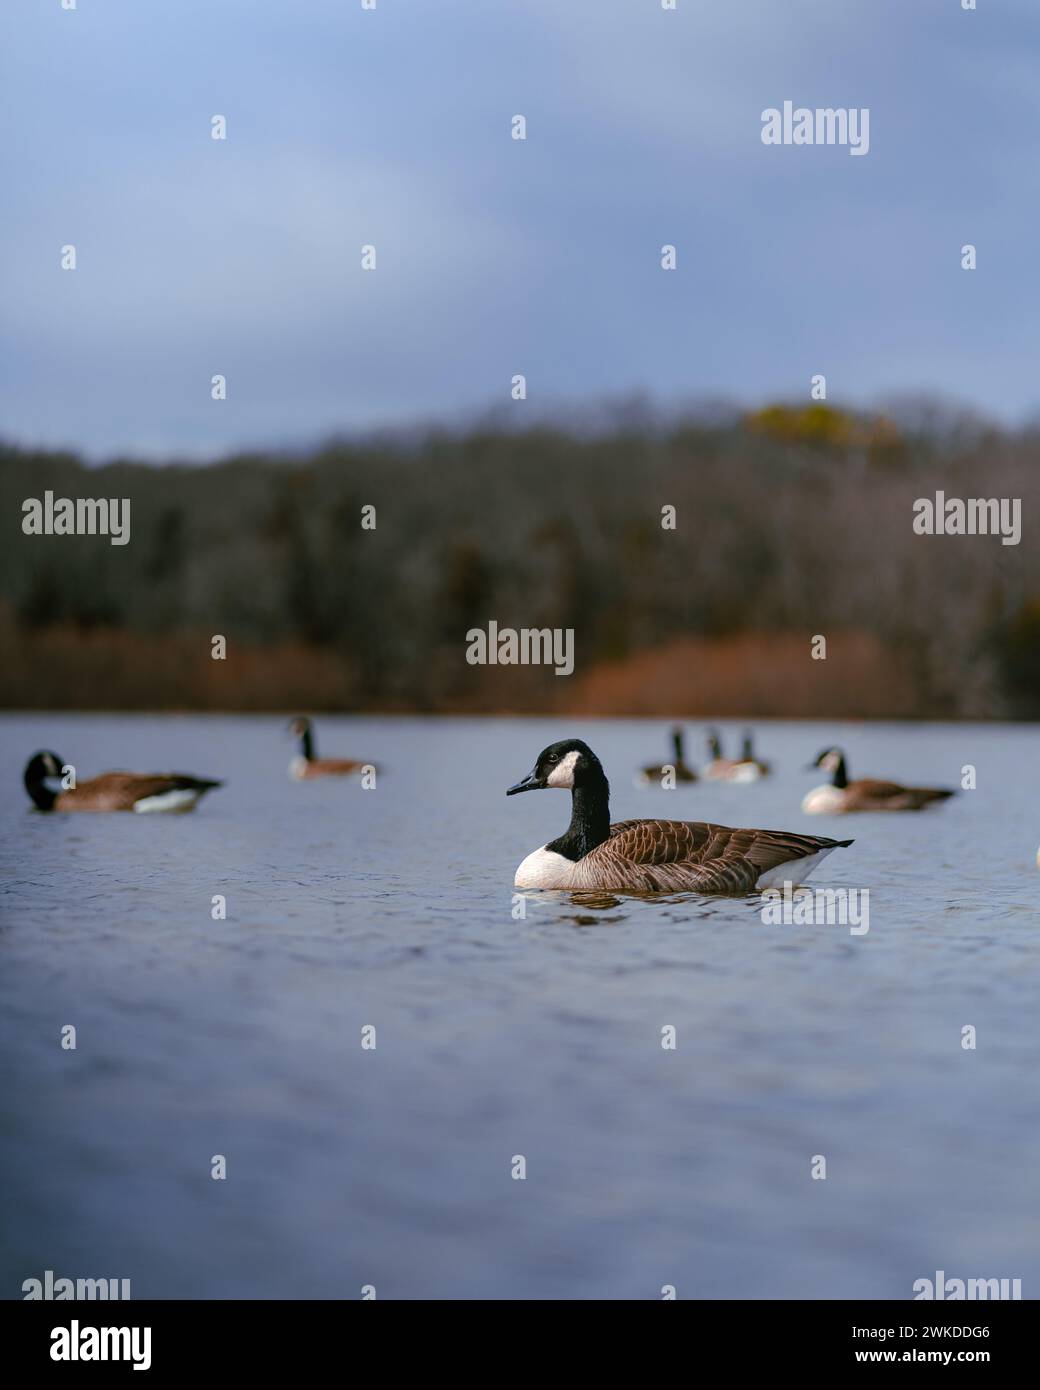 A flock of Canada geese swimming in the serene water Stock Photo